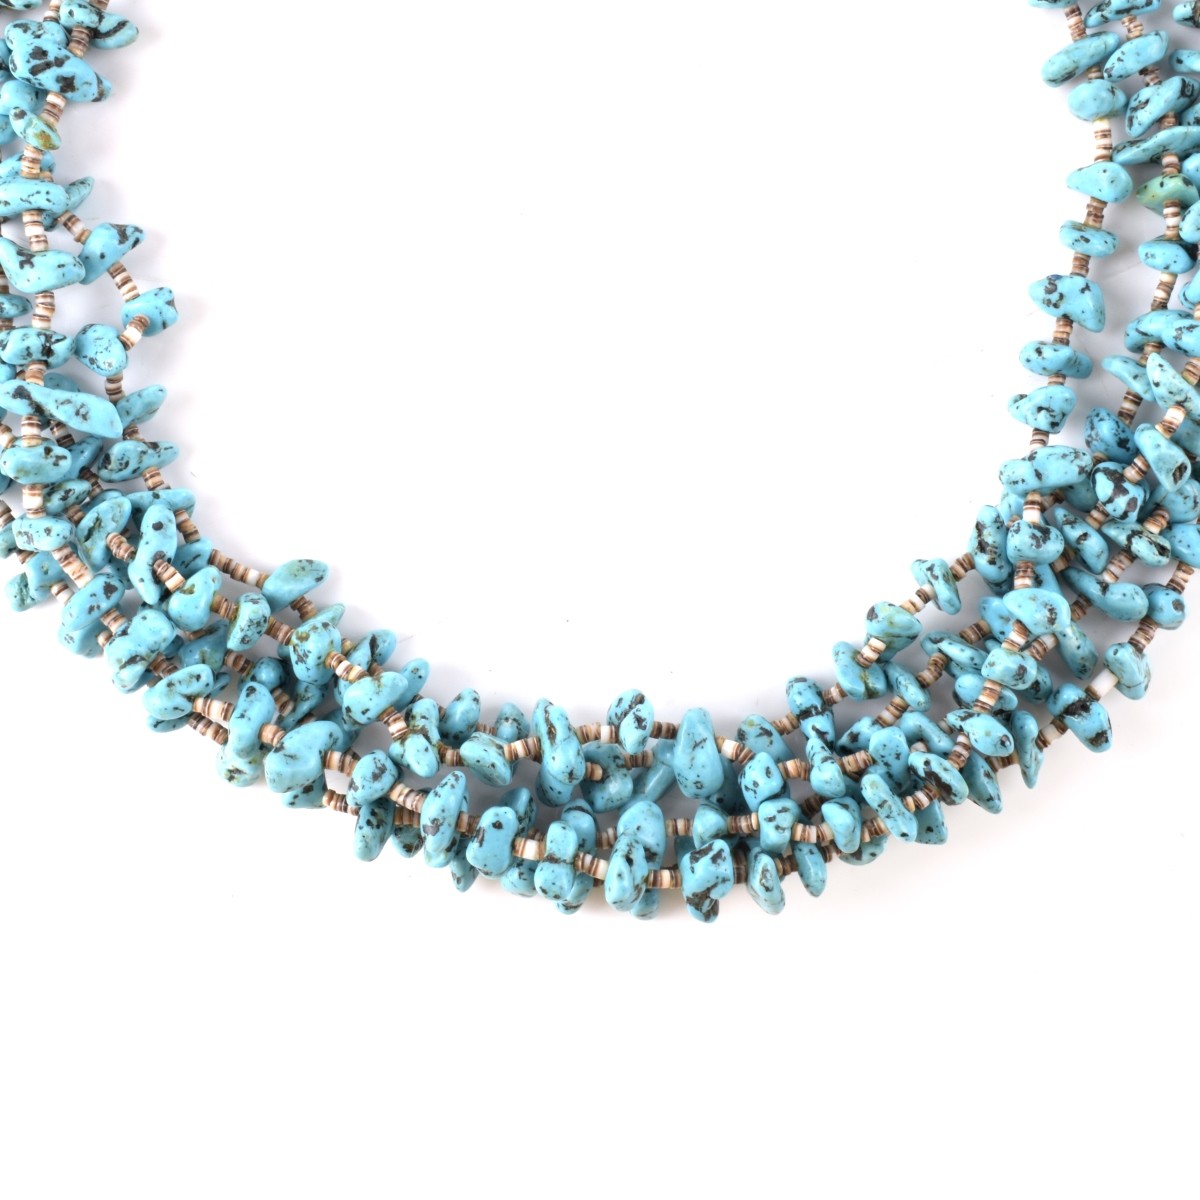 Five Strand Turquoise Bead Necklace